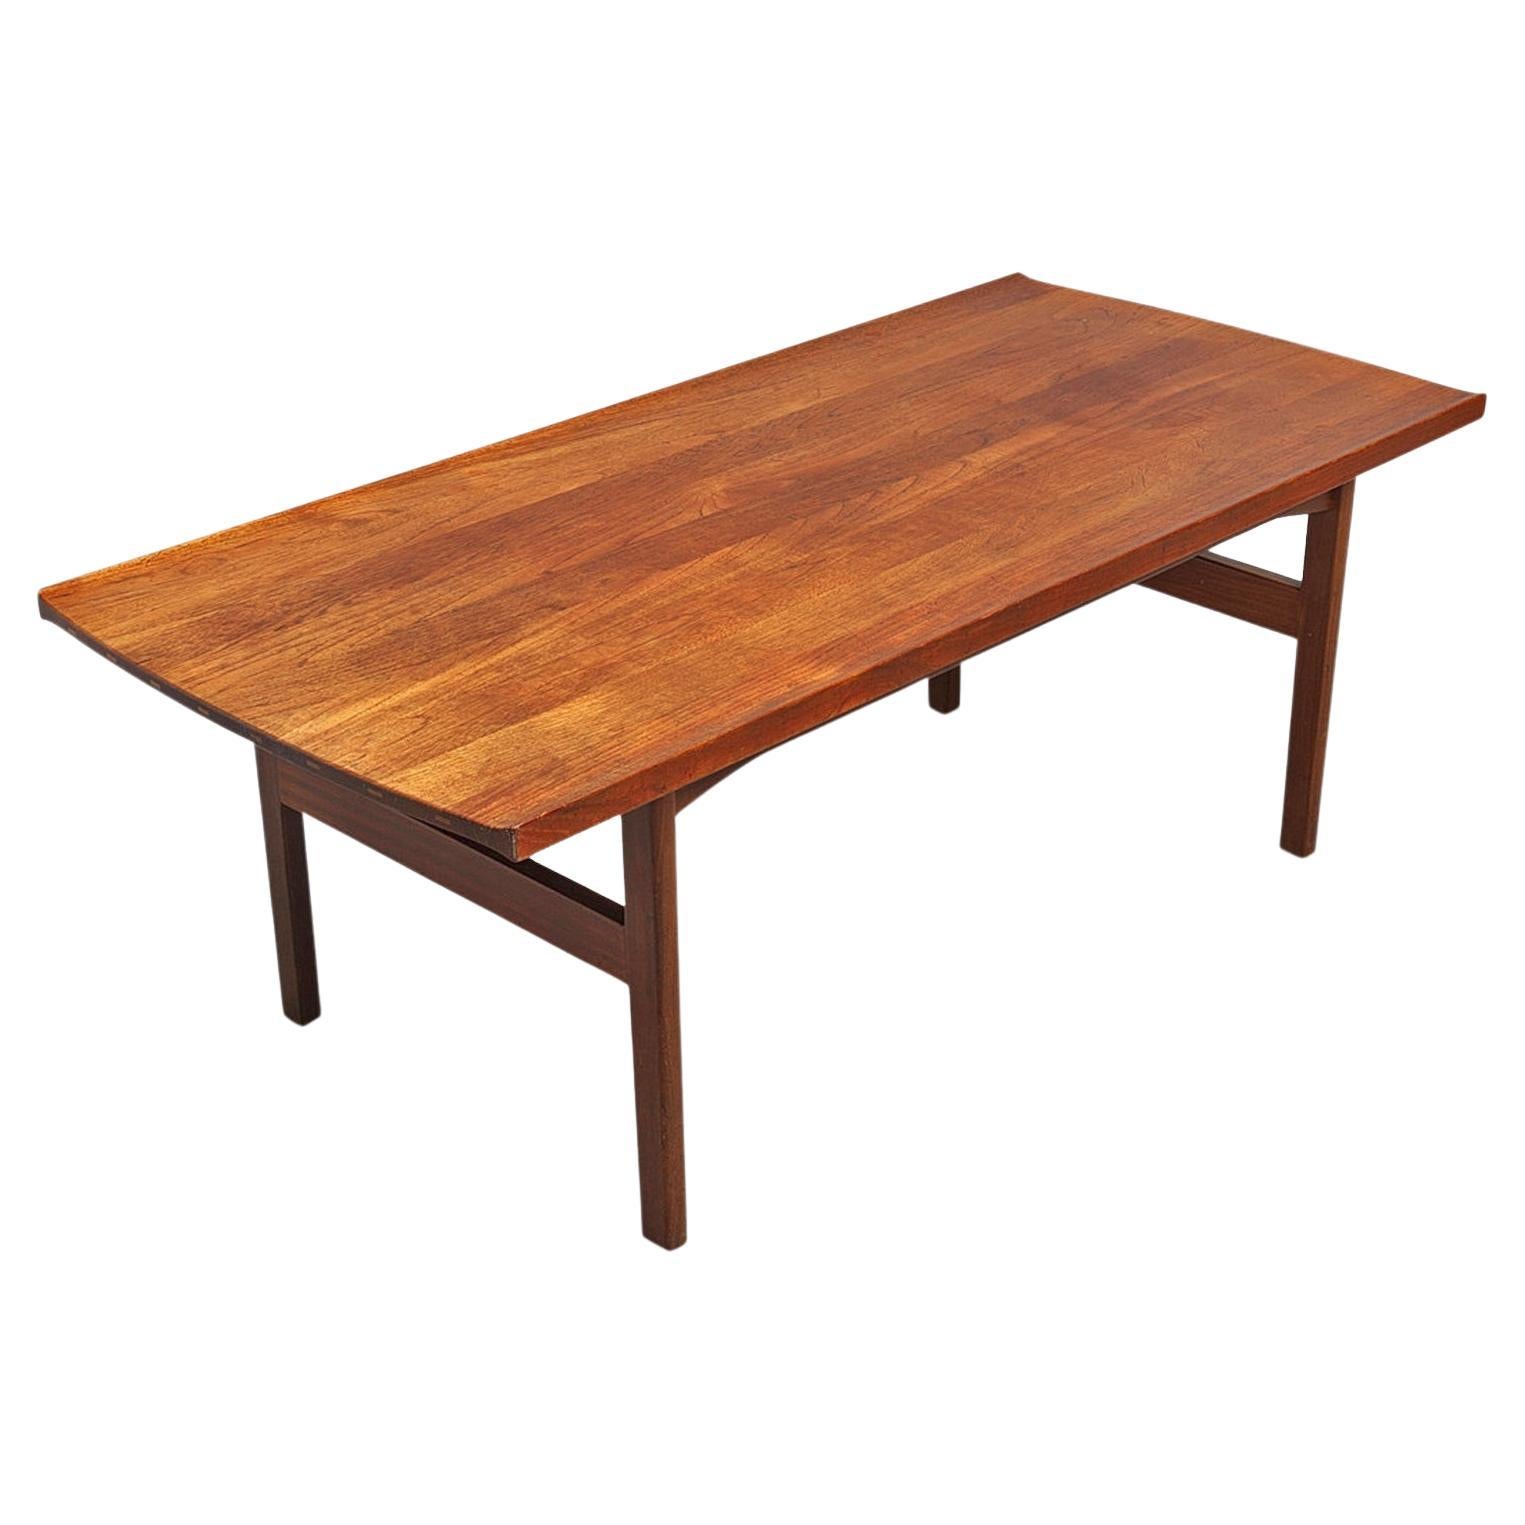 Solid Teak Coffee Table by Tove + Edvard Kindt-Larsen #2 For Sale